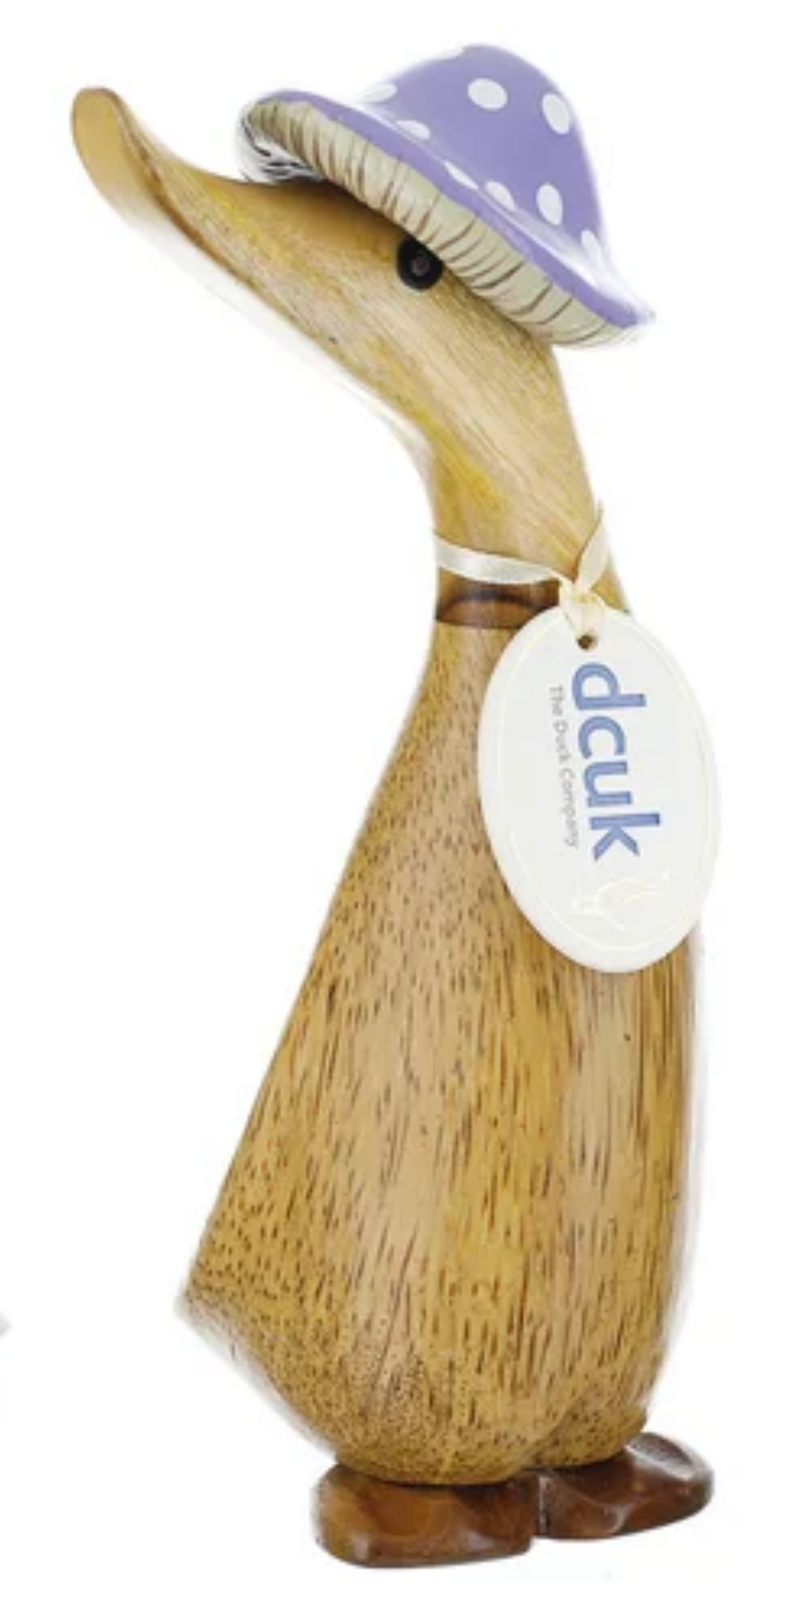 DCUK 'Toadstool Folk' natural wood Duckling in Spotty Hat, with name tag